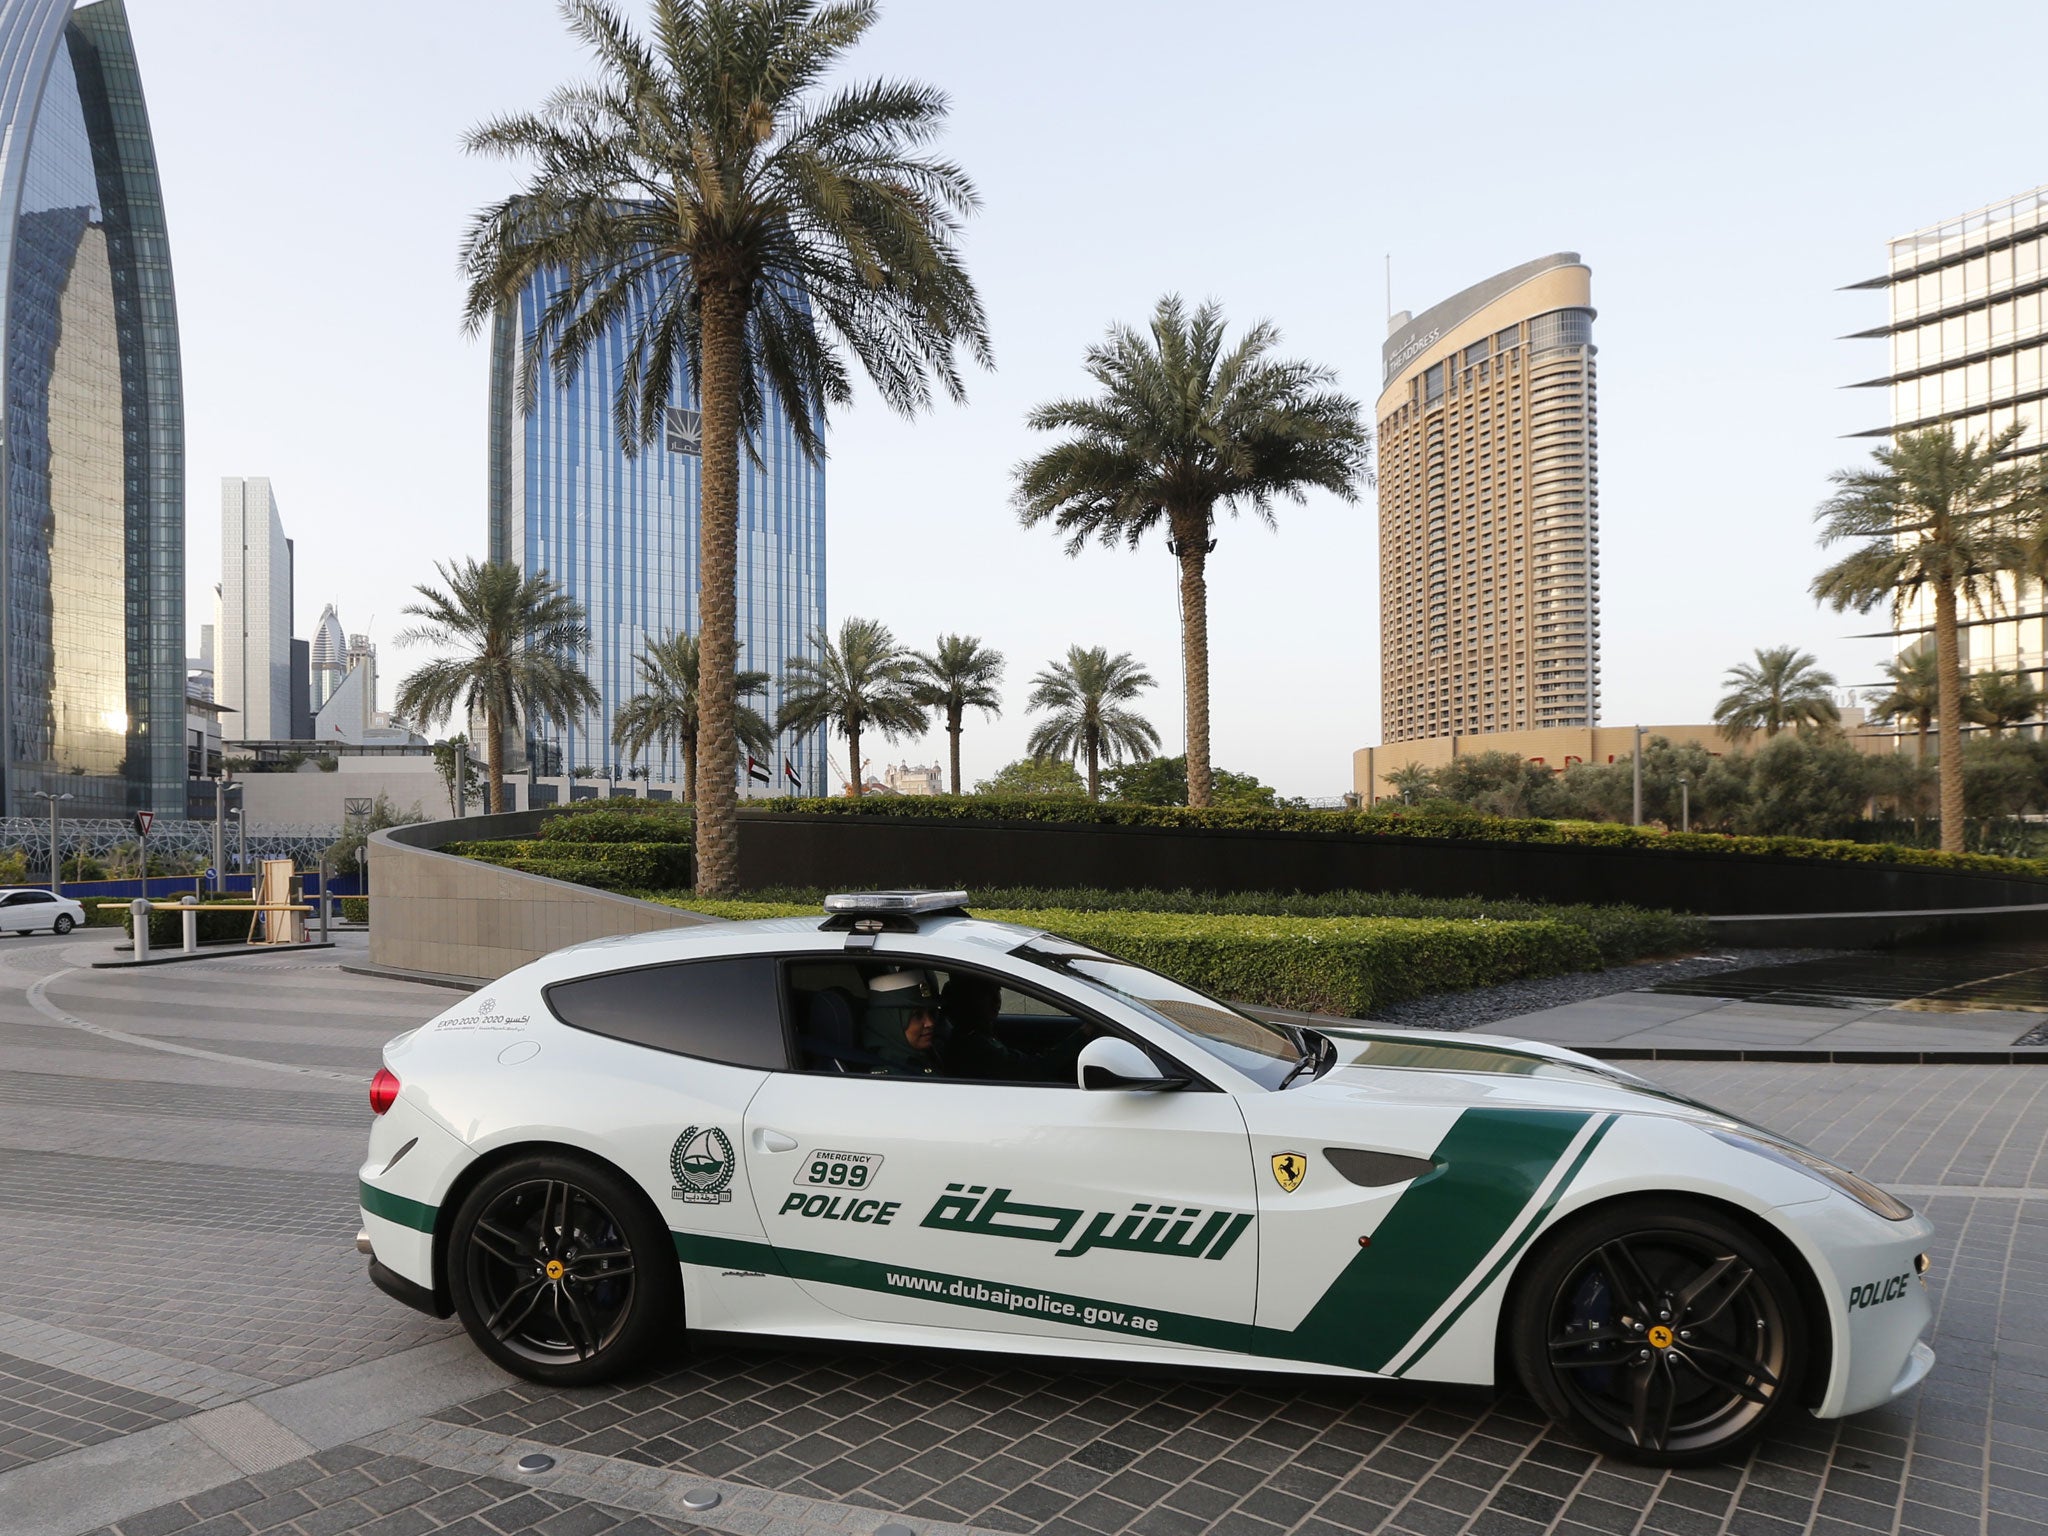 Emirati female police officers drive a Ferrari police vehicle in the Gulf emirate of Dubai on April 25, 2013. Dubai police showed off a new Ferrari they will use to patrol the city state, hot on the heels of a Lamborghini which joined the fleet earlier.